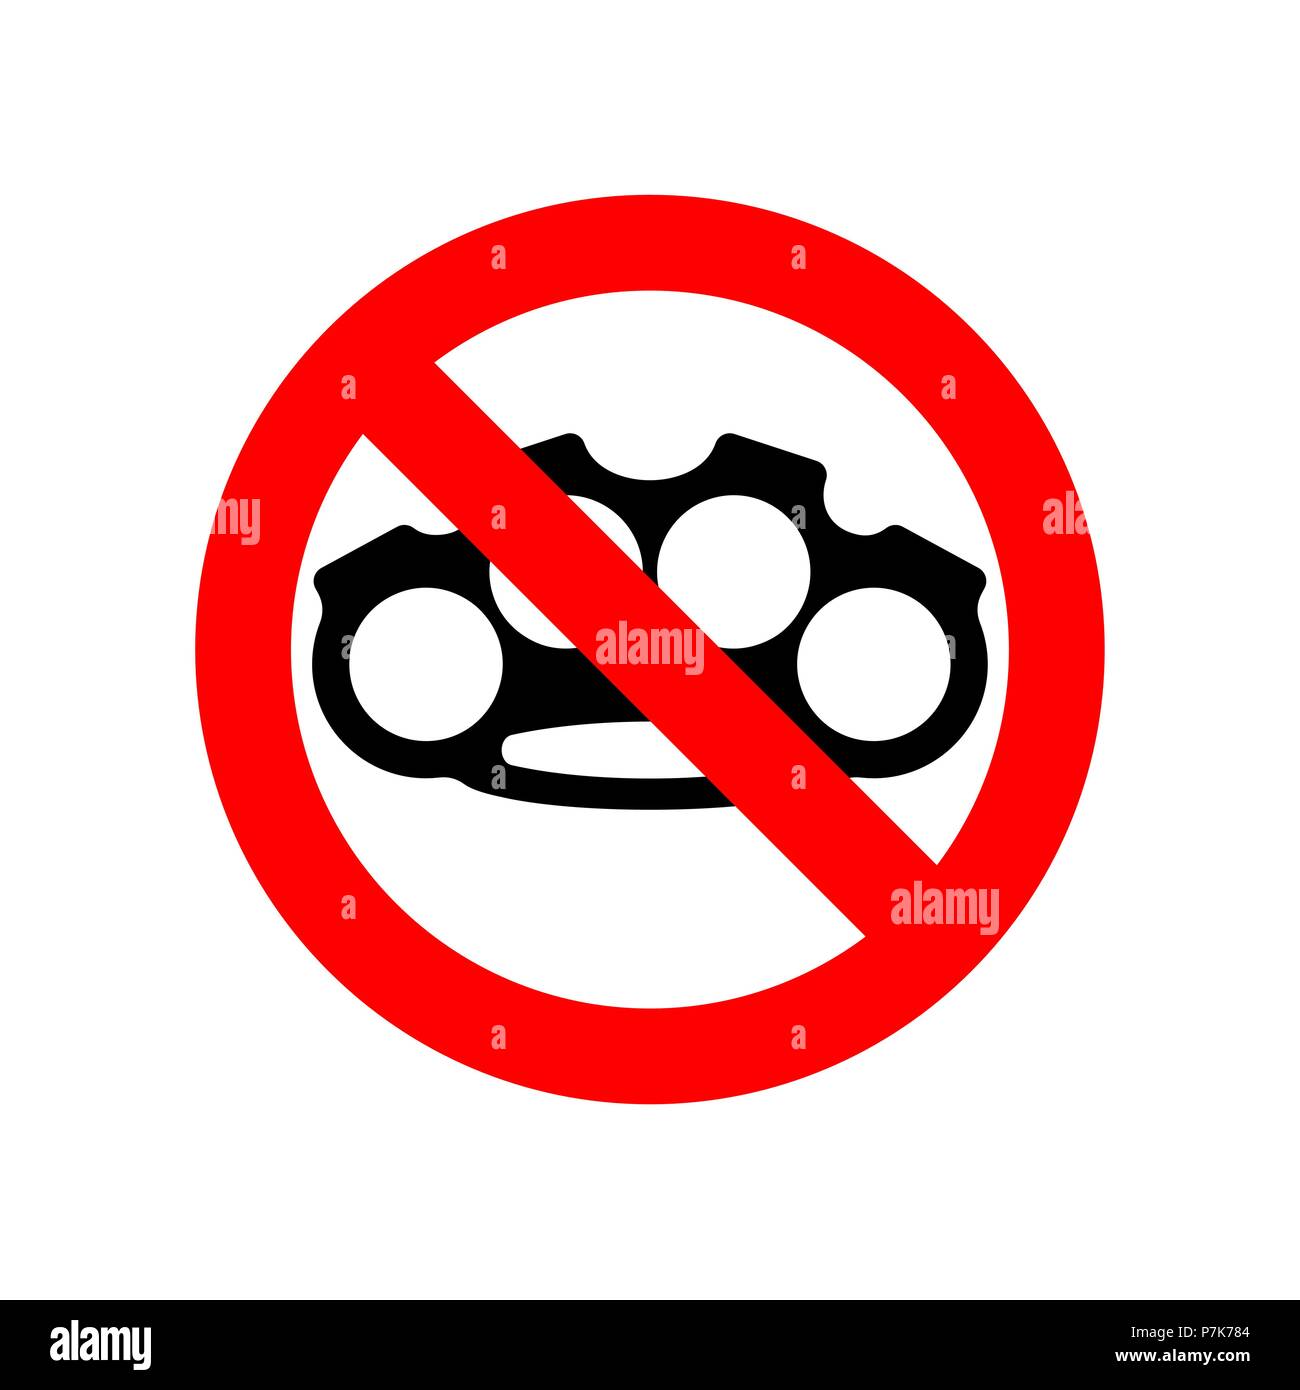 Stop brass knuckle. No Weapon Robber. Red prohibitory sign. Ban